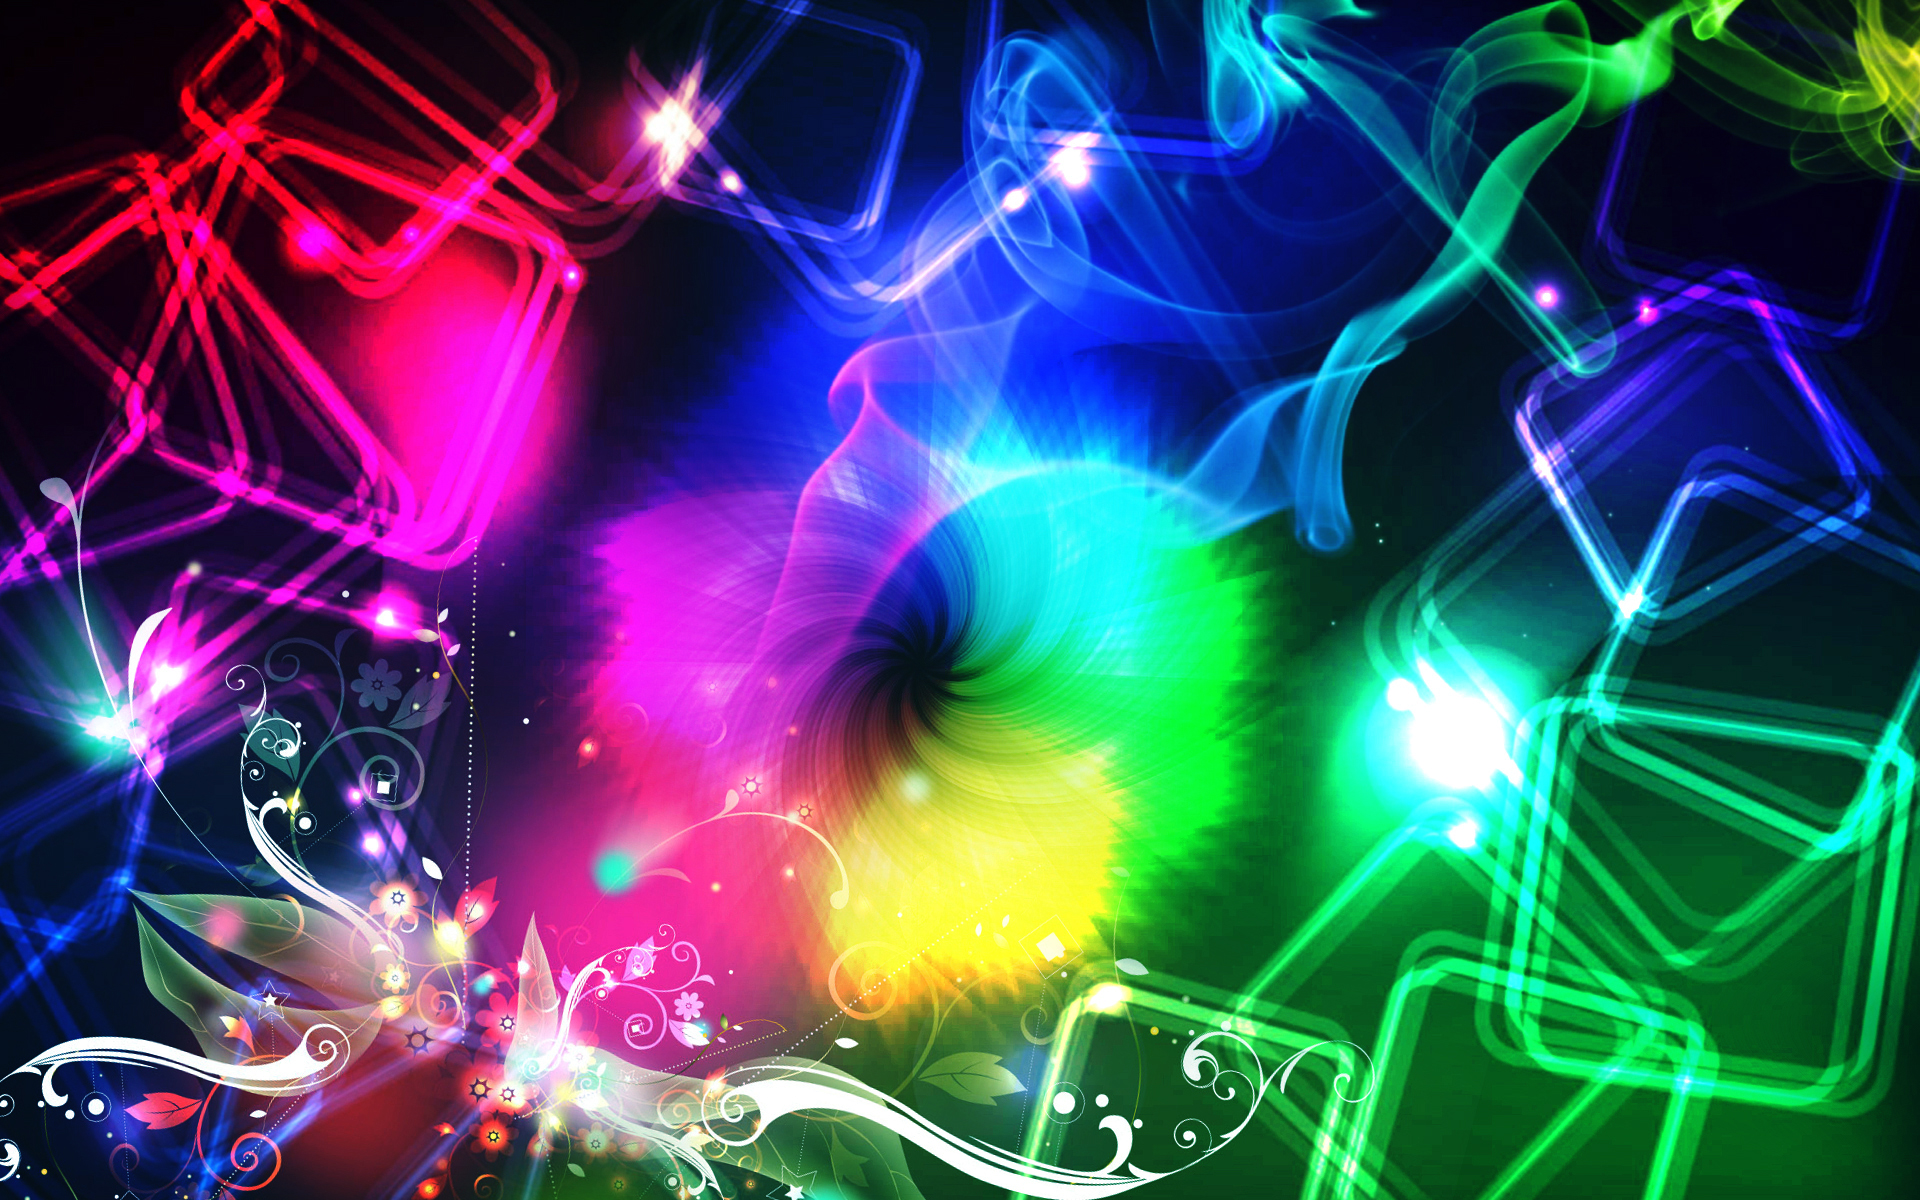 Colorful Background 23